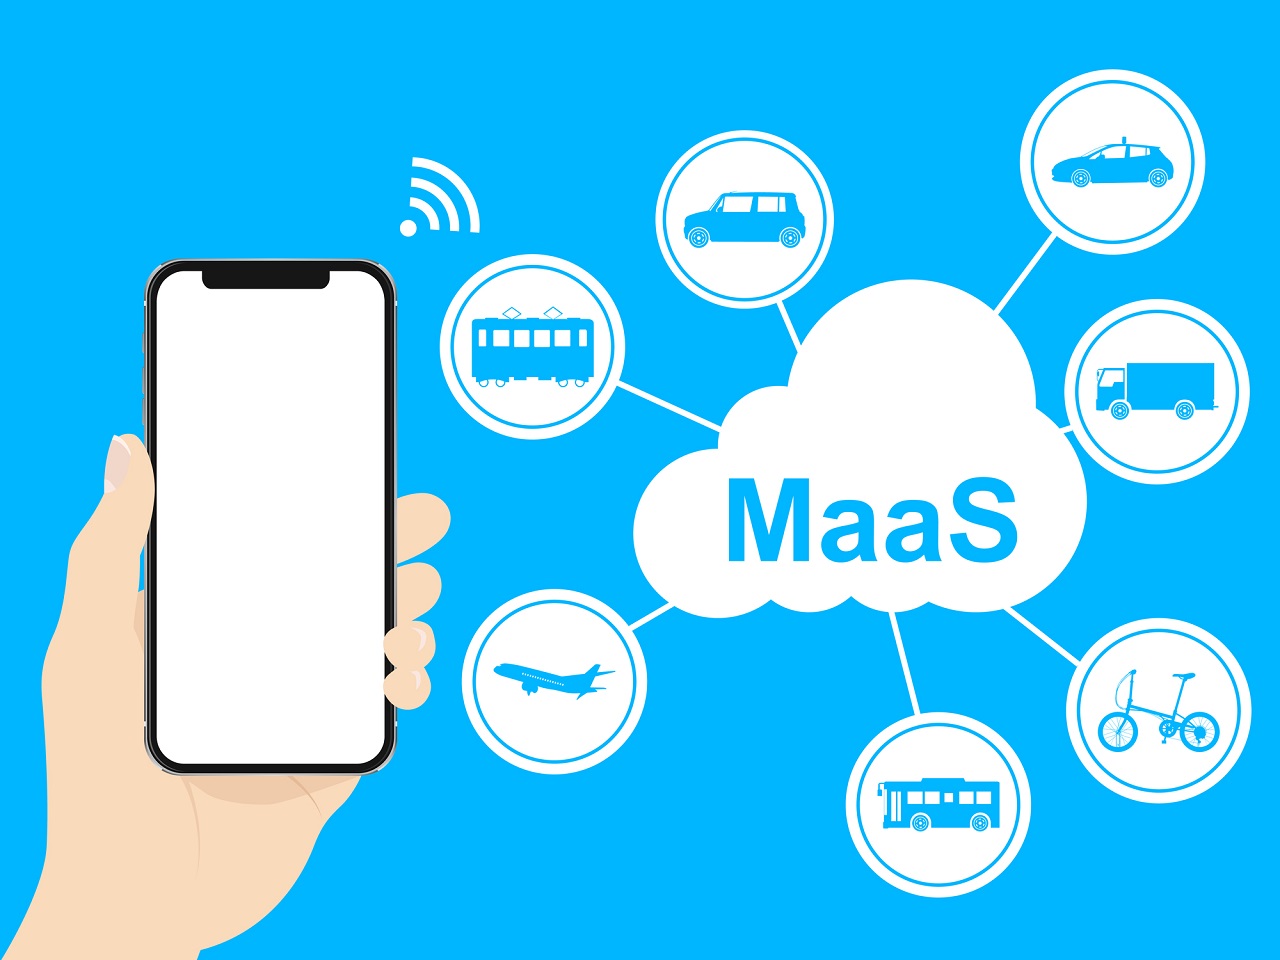 MaaS（Mobility as a Service）とは？未来の移動手段の展望を事例とともに解説